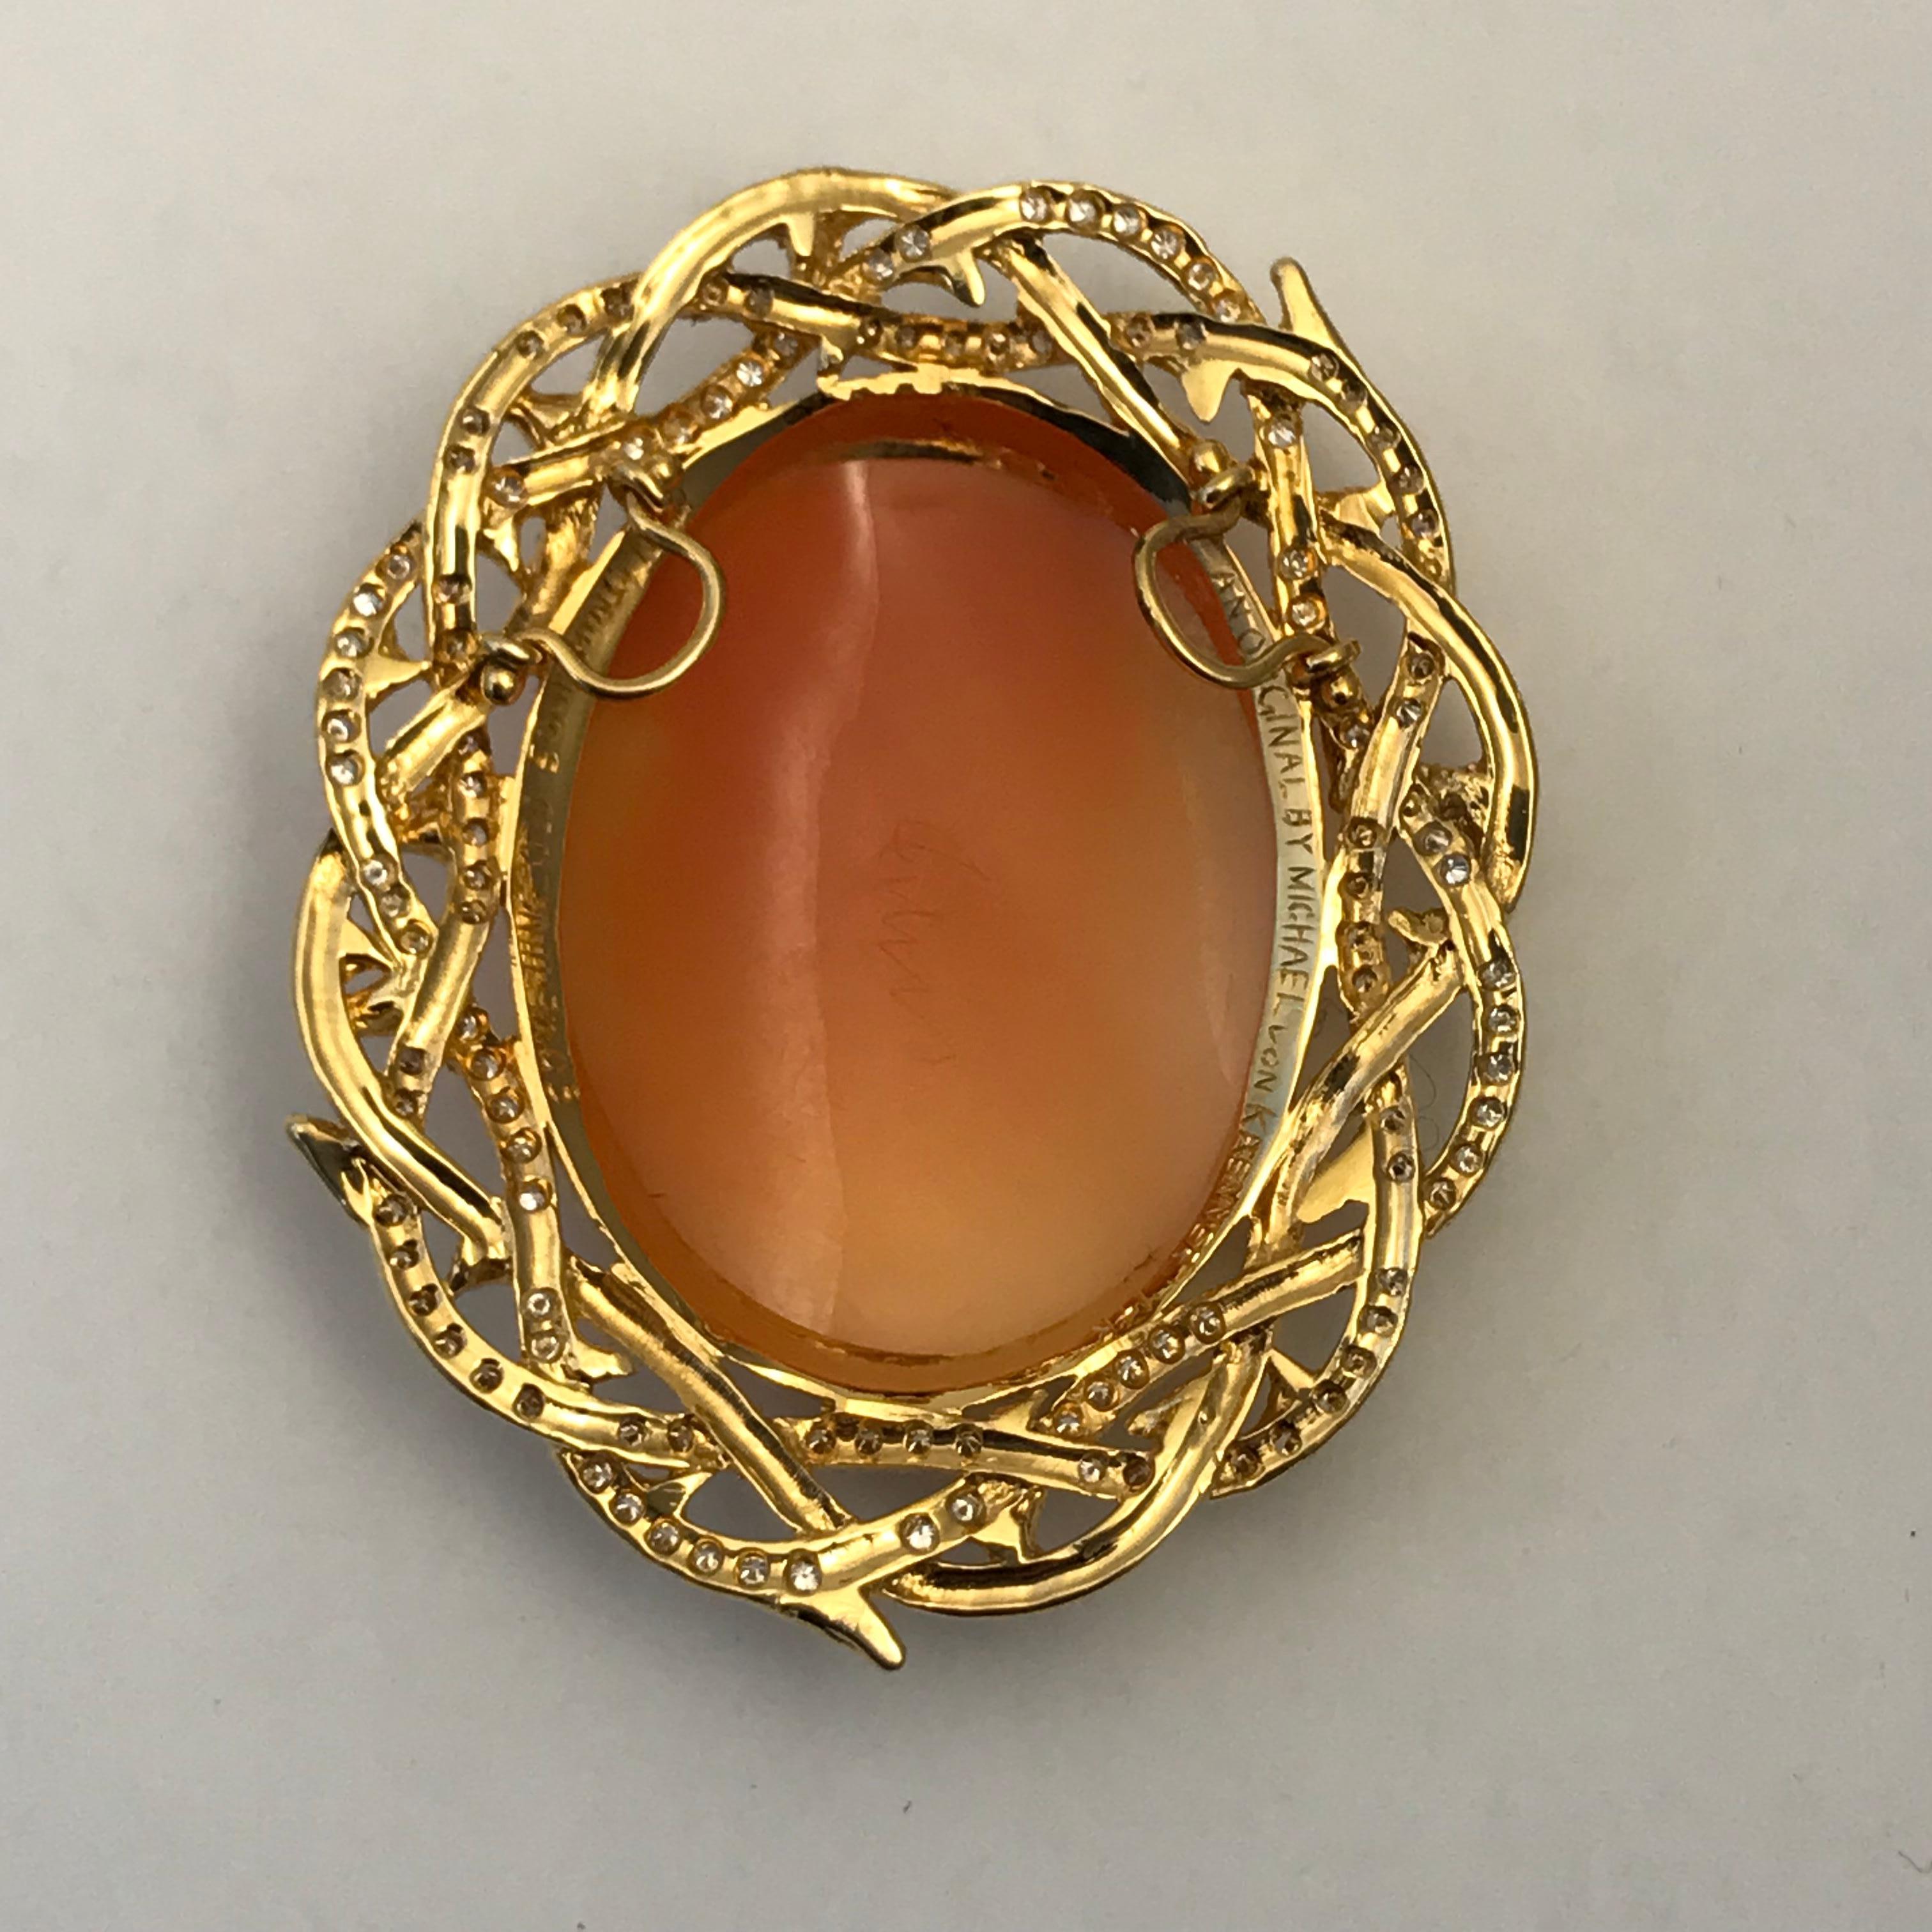 Cameo 1890s Jesus Set in 14 Karat Gold with Diamonds, Rubies and Brown Diamonds For Sale 3